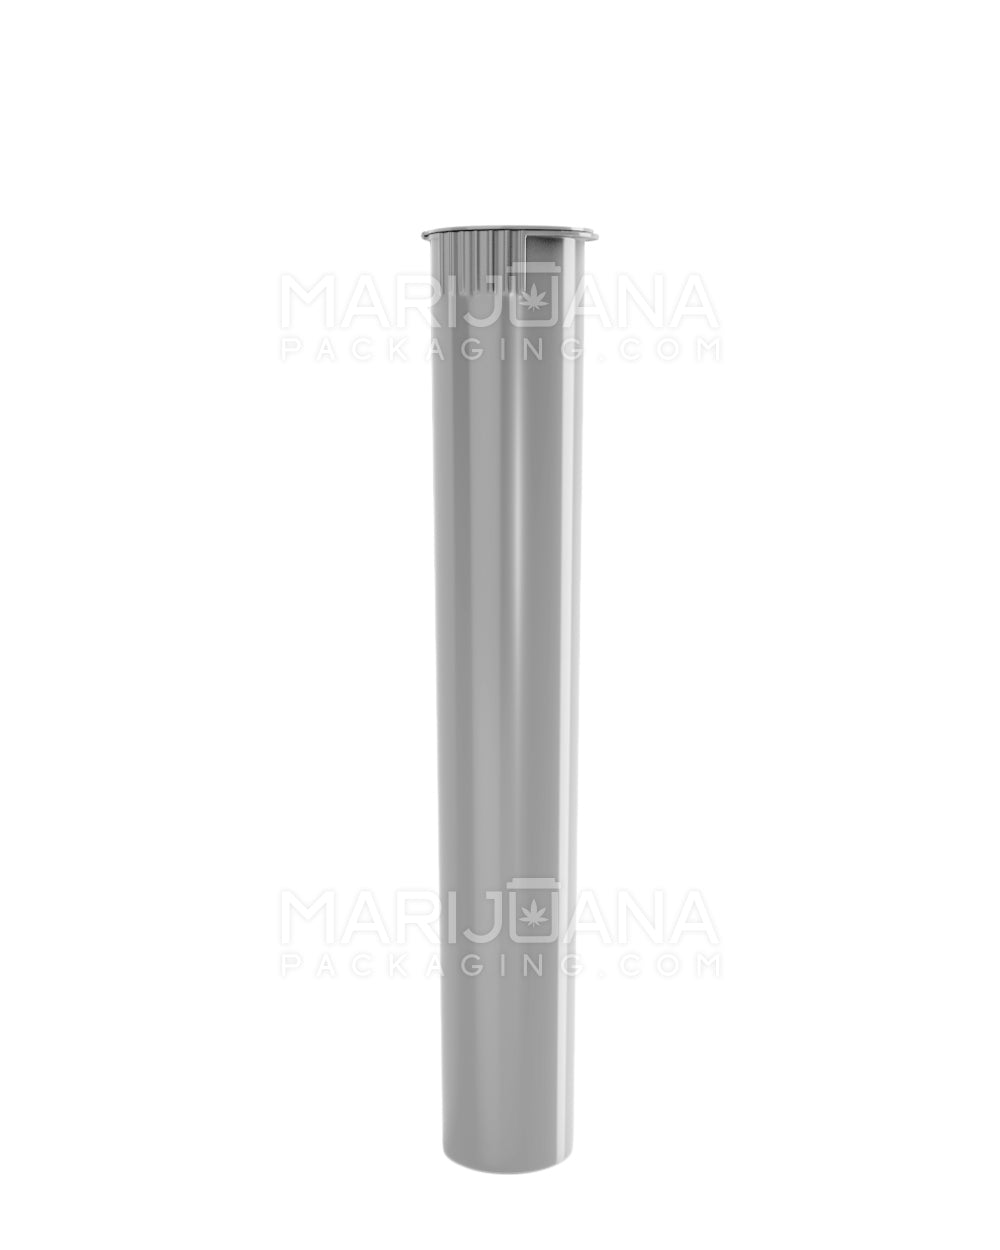 Child Resistant | King Size Pop Top Opaque Plastic Pre-Roll Tubes | 116mm - Silver - 1000 Count